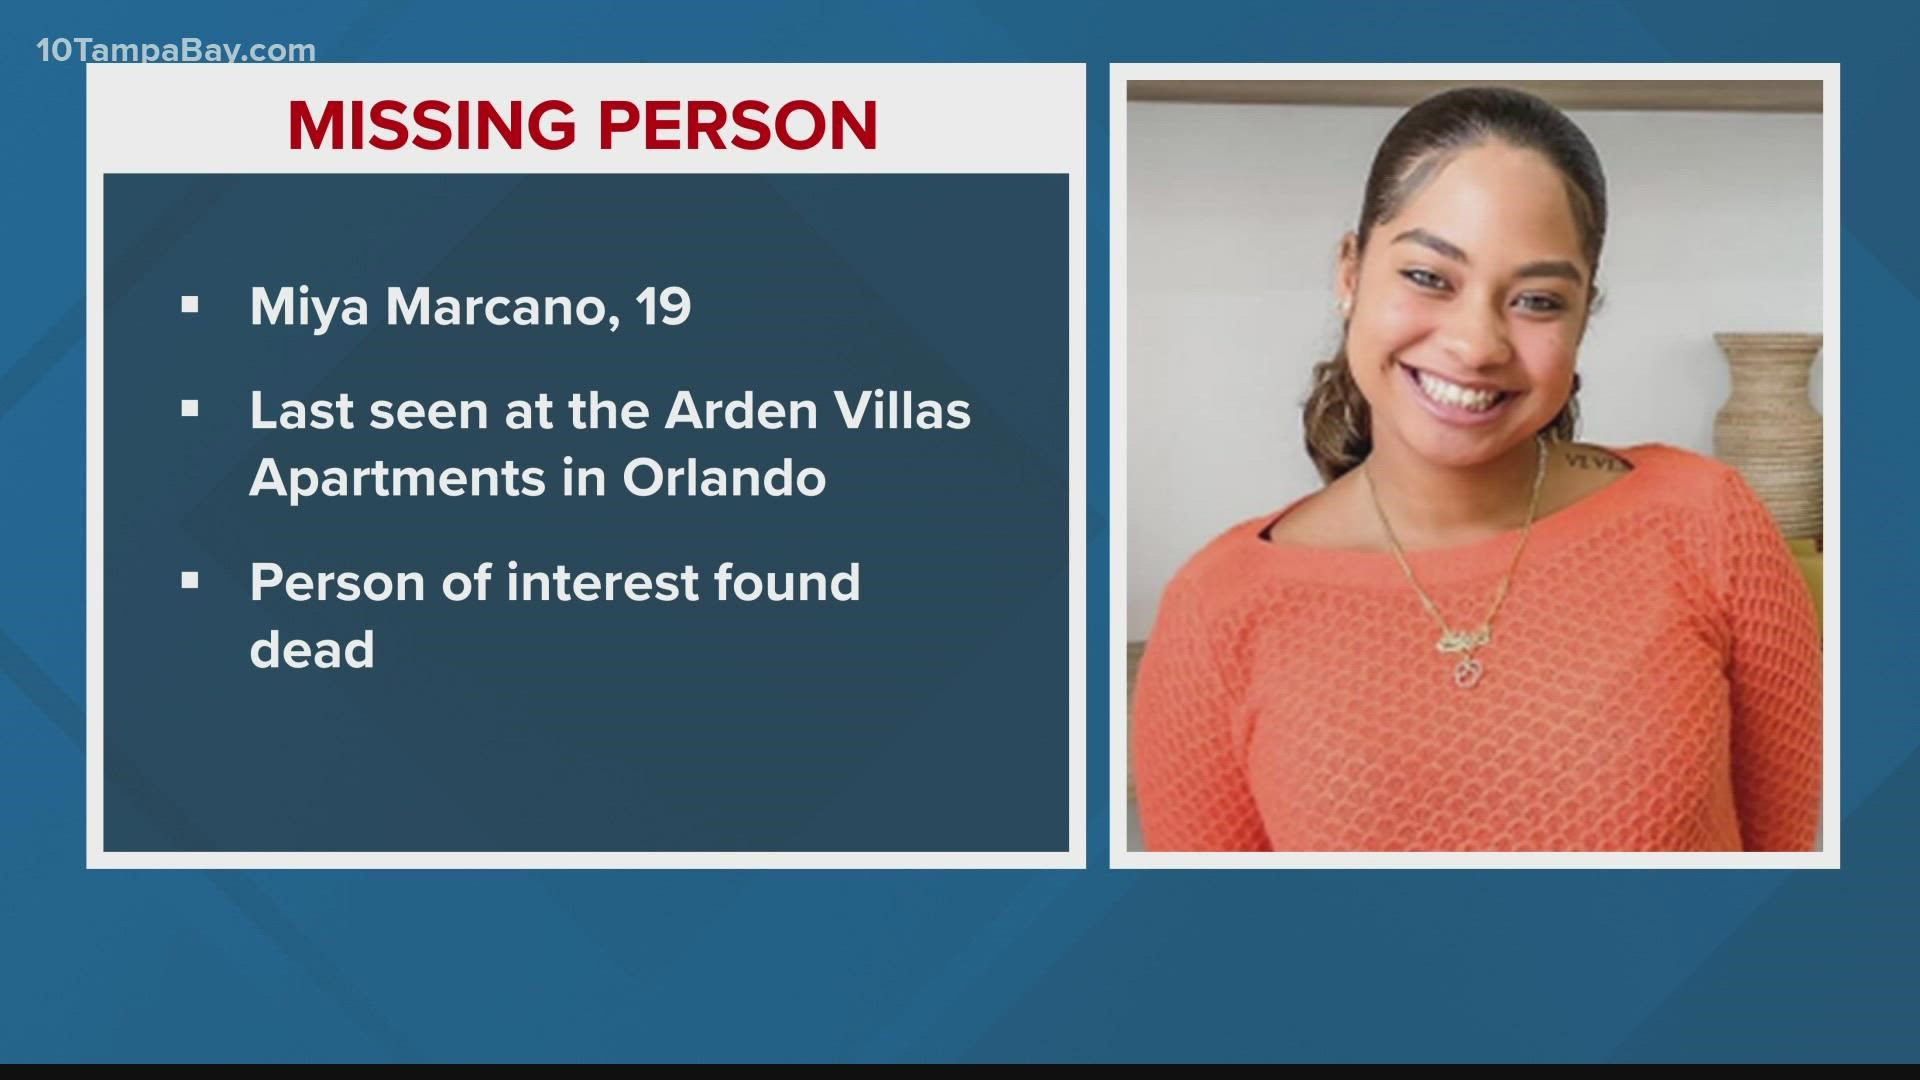 The person of interest was a maintenance worker at Arden Villas Apartments where Miya Marcano lives and works.